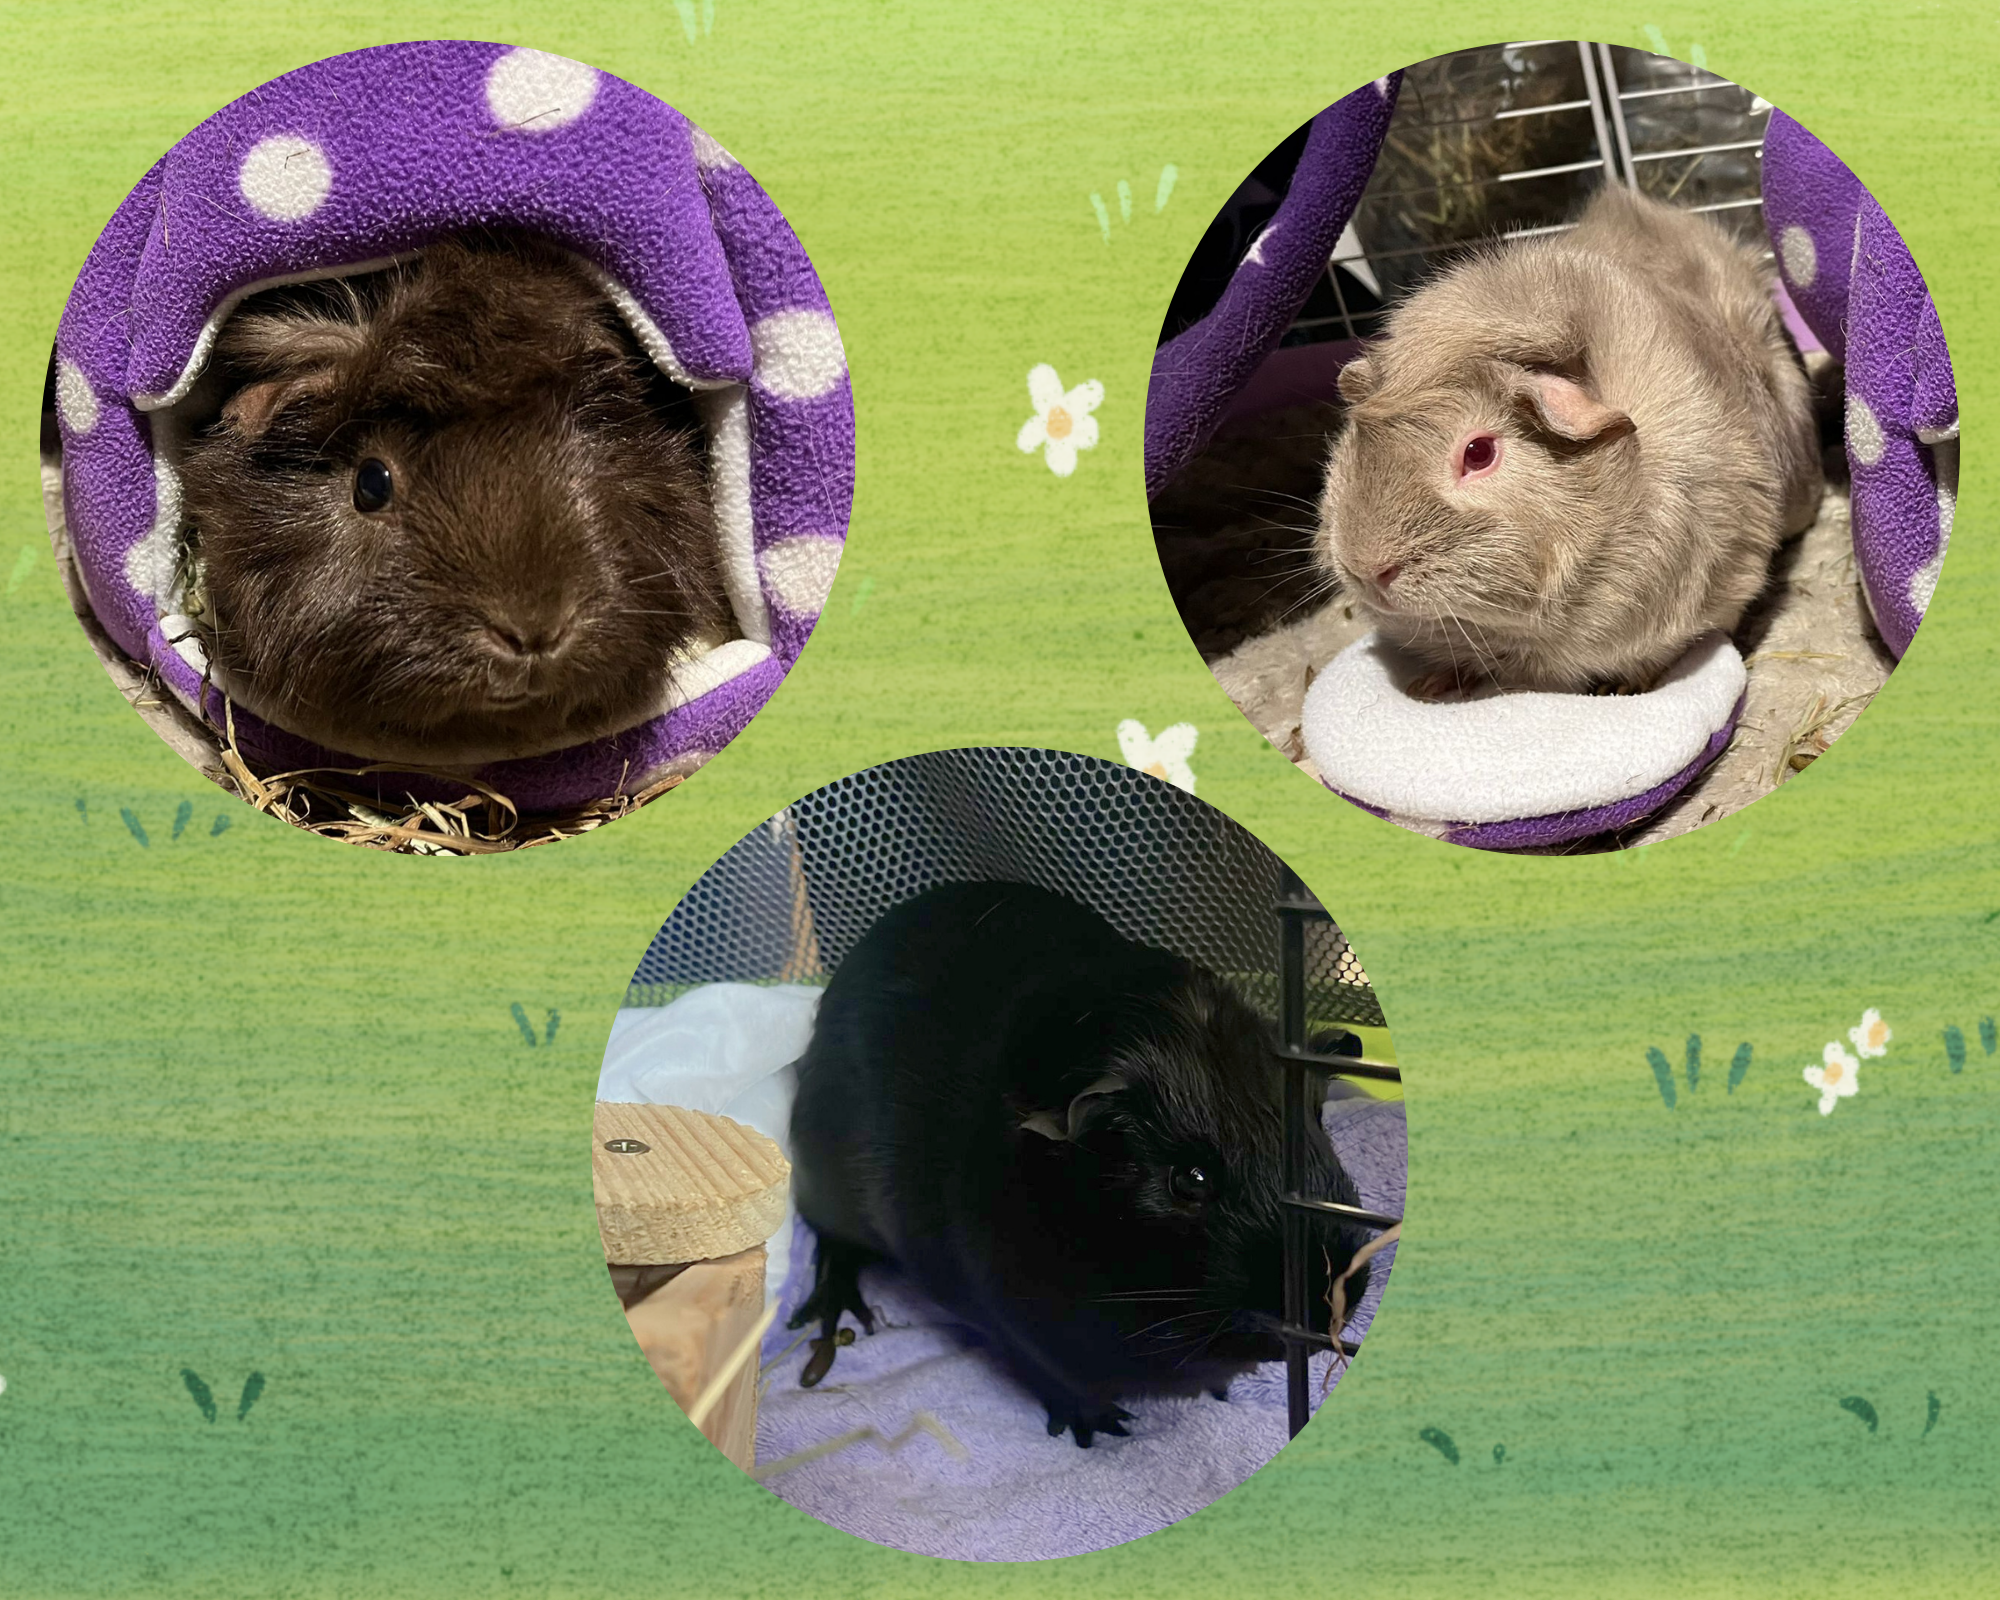 Three guinea pigs in circles on a grassy background. One is brown, one is cream and one is black.